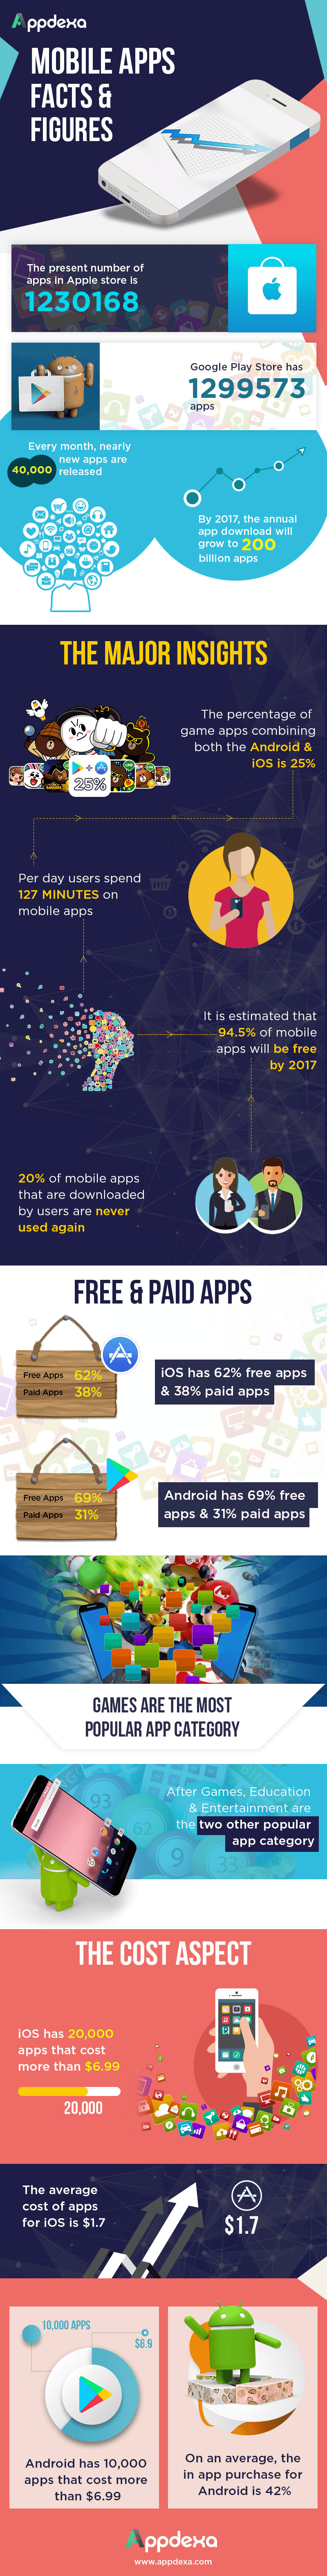 mobile-app-facts-figures